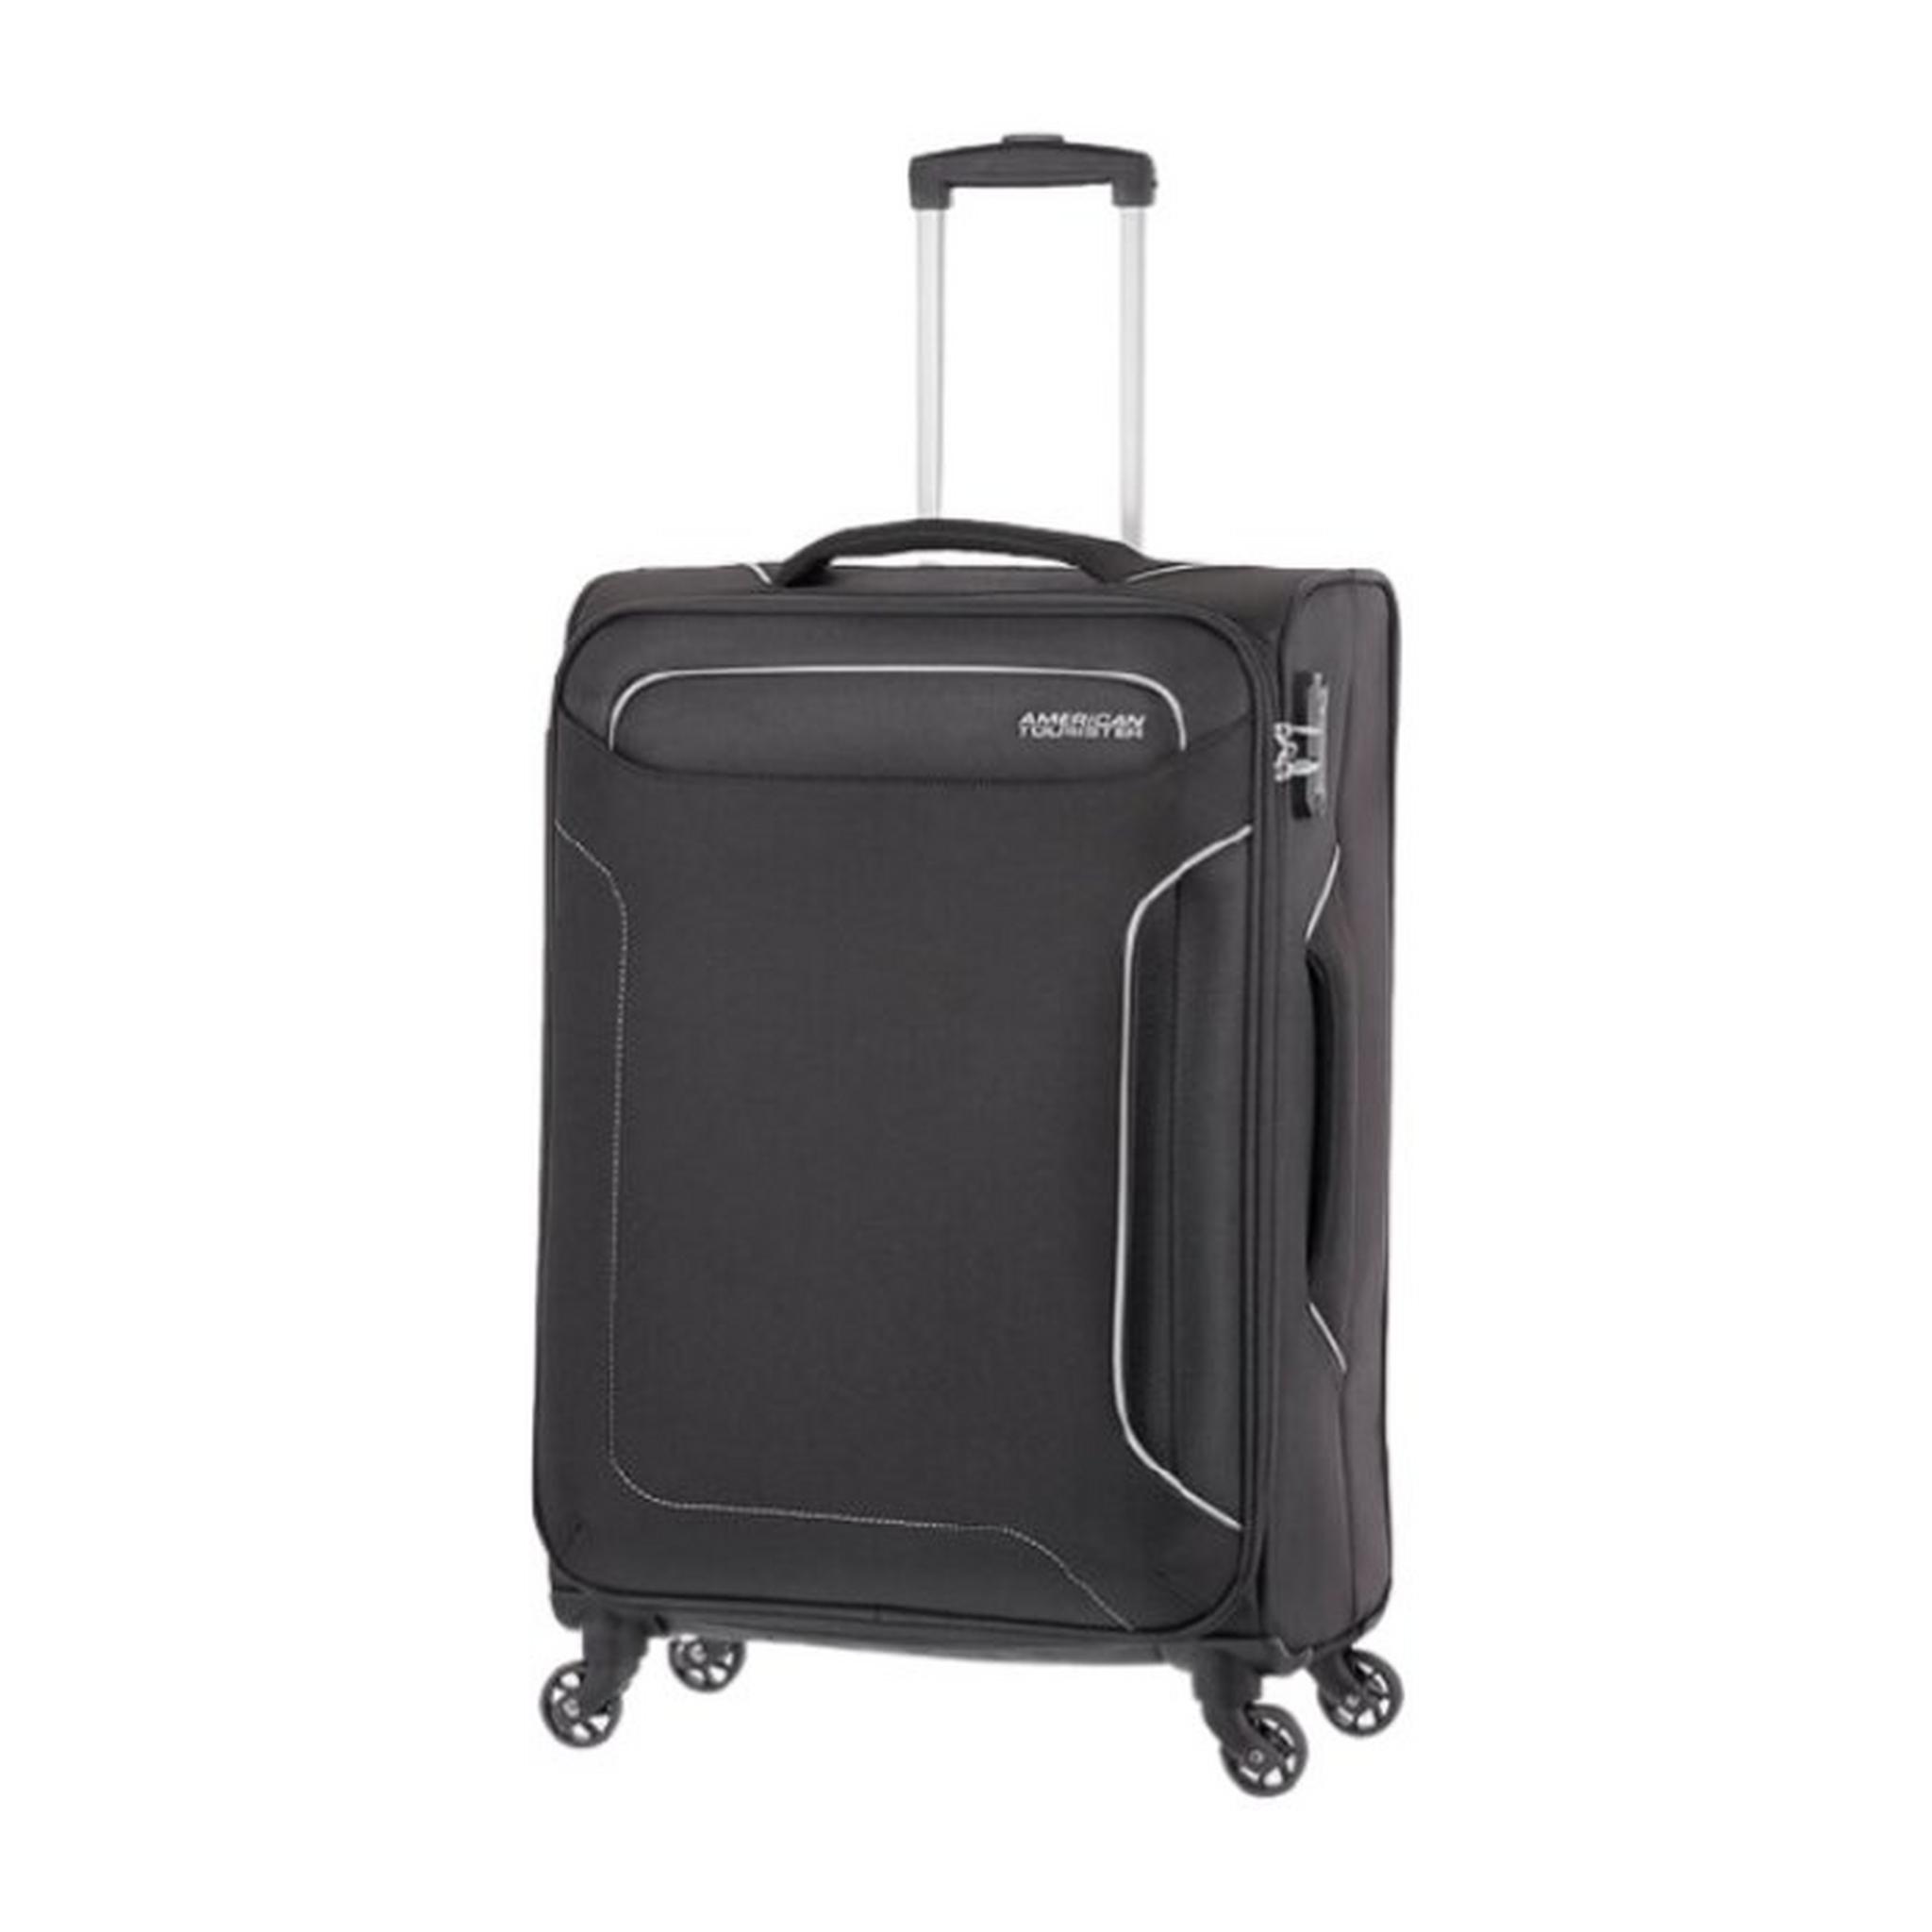 American Tourister Holiday Spinner Soft Luggage  80CM Black